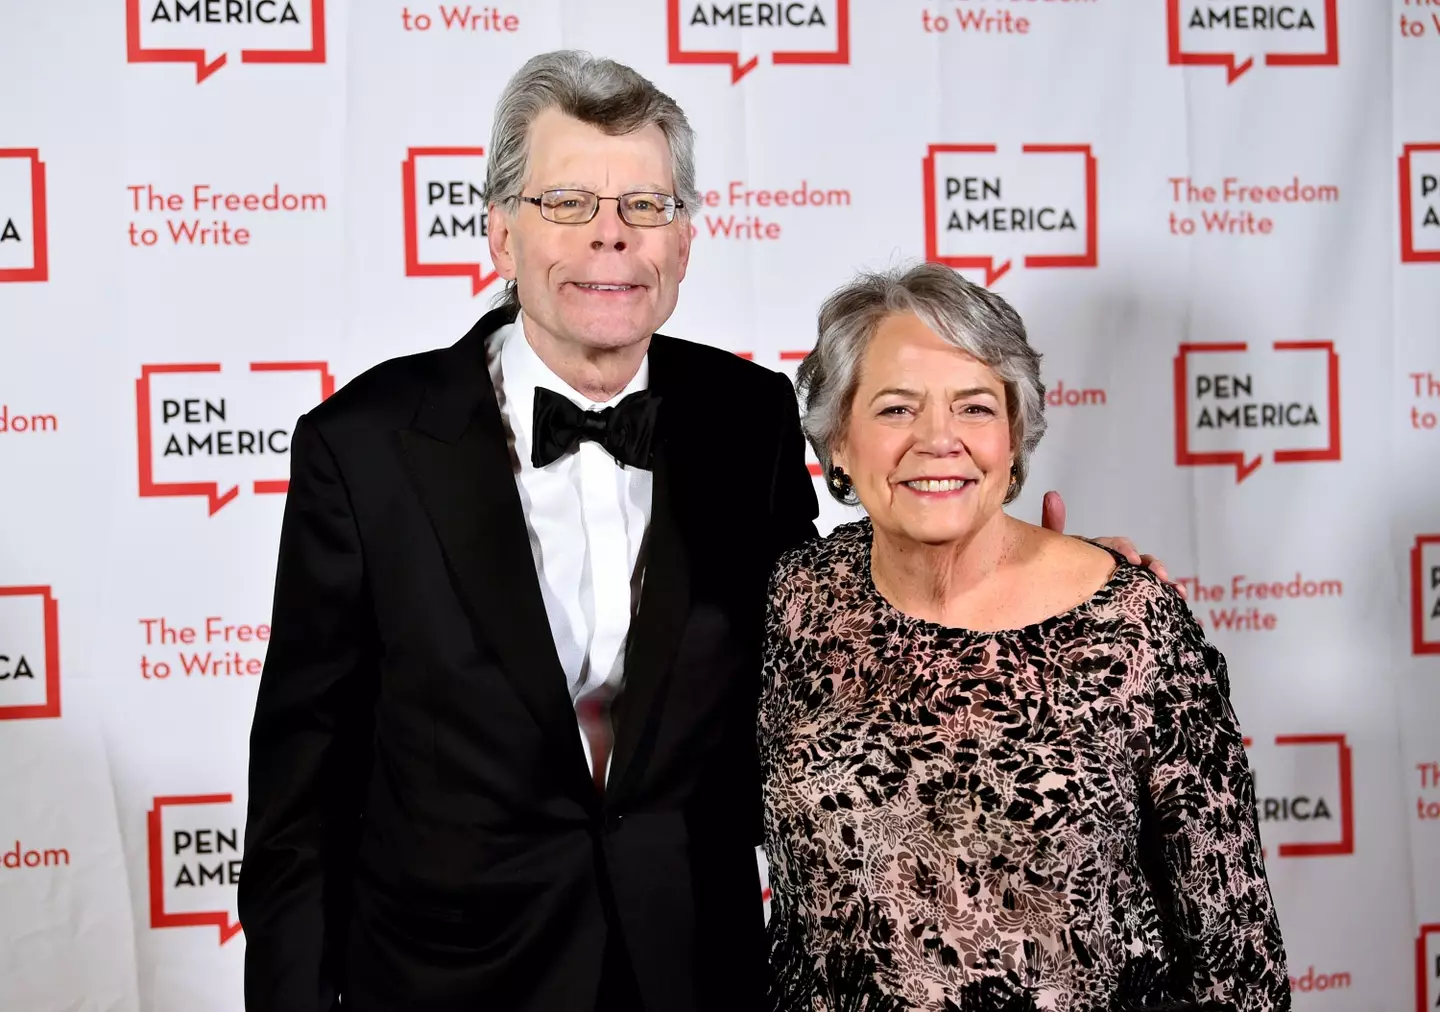 Stephen King ended up in a Twitter spat with the podcaster.